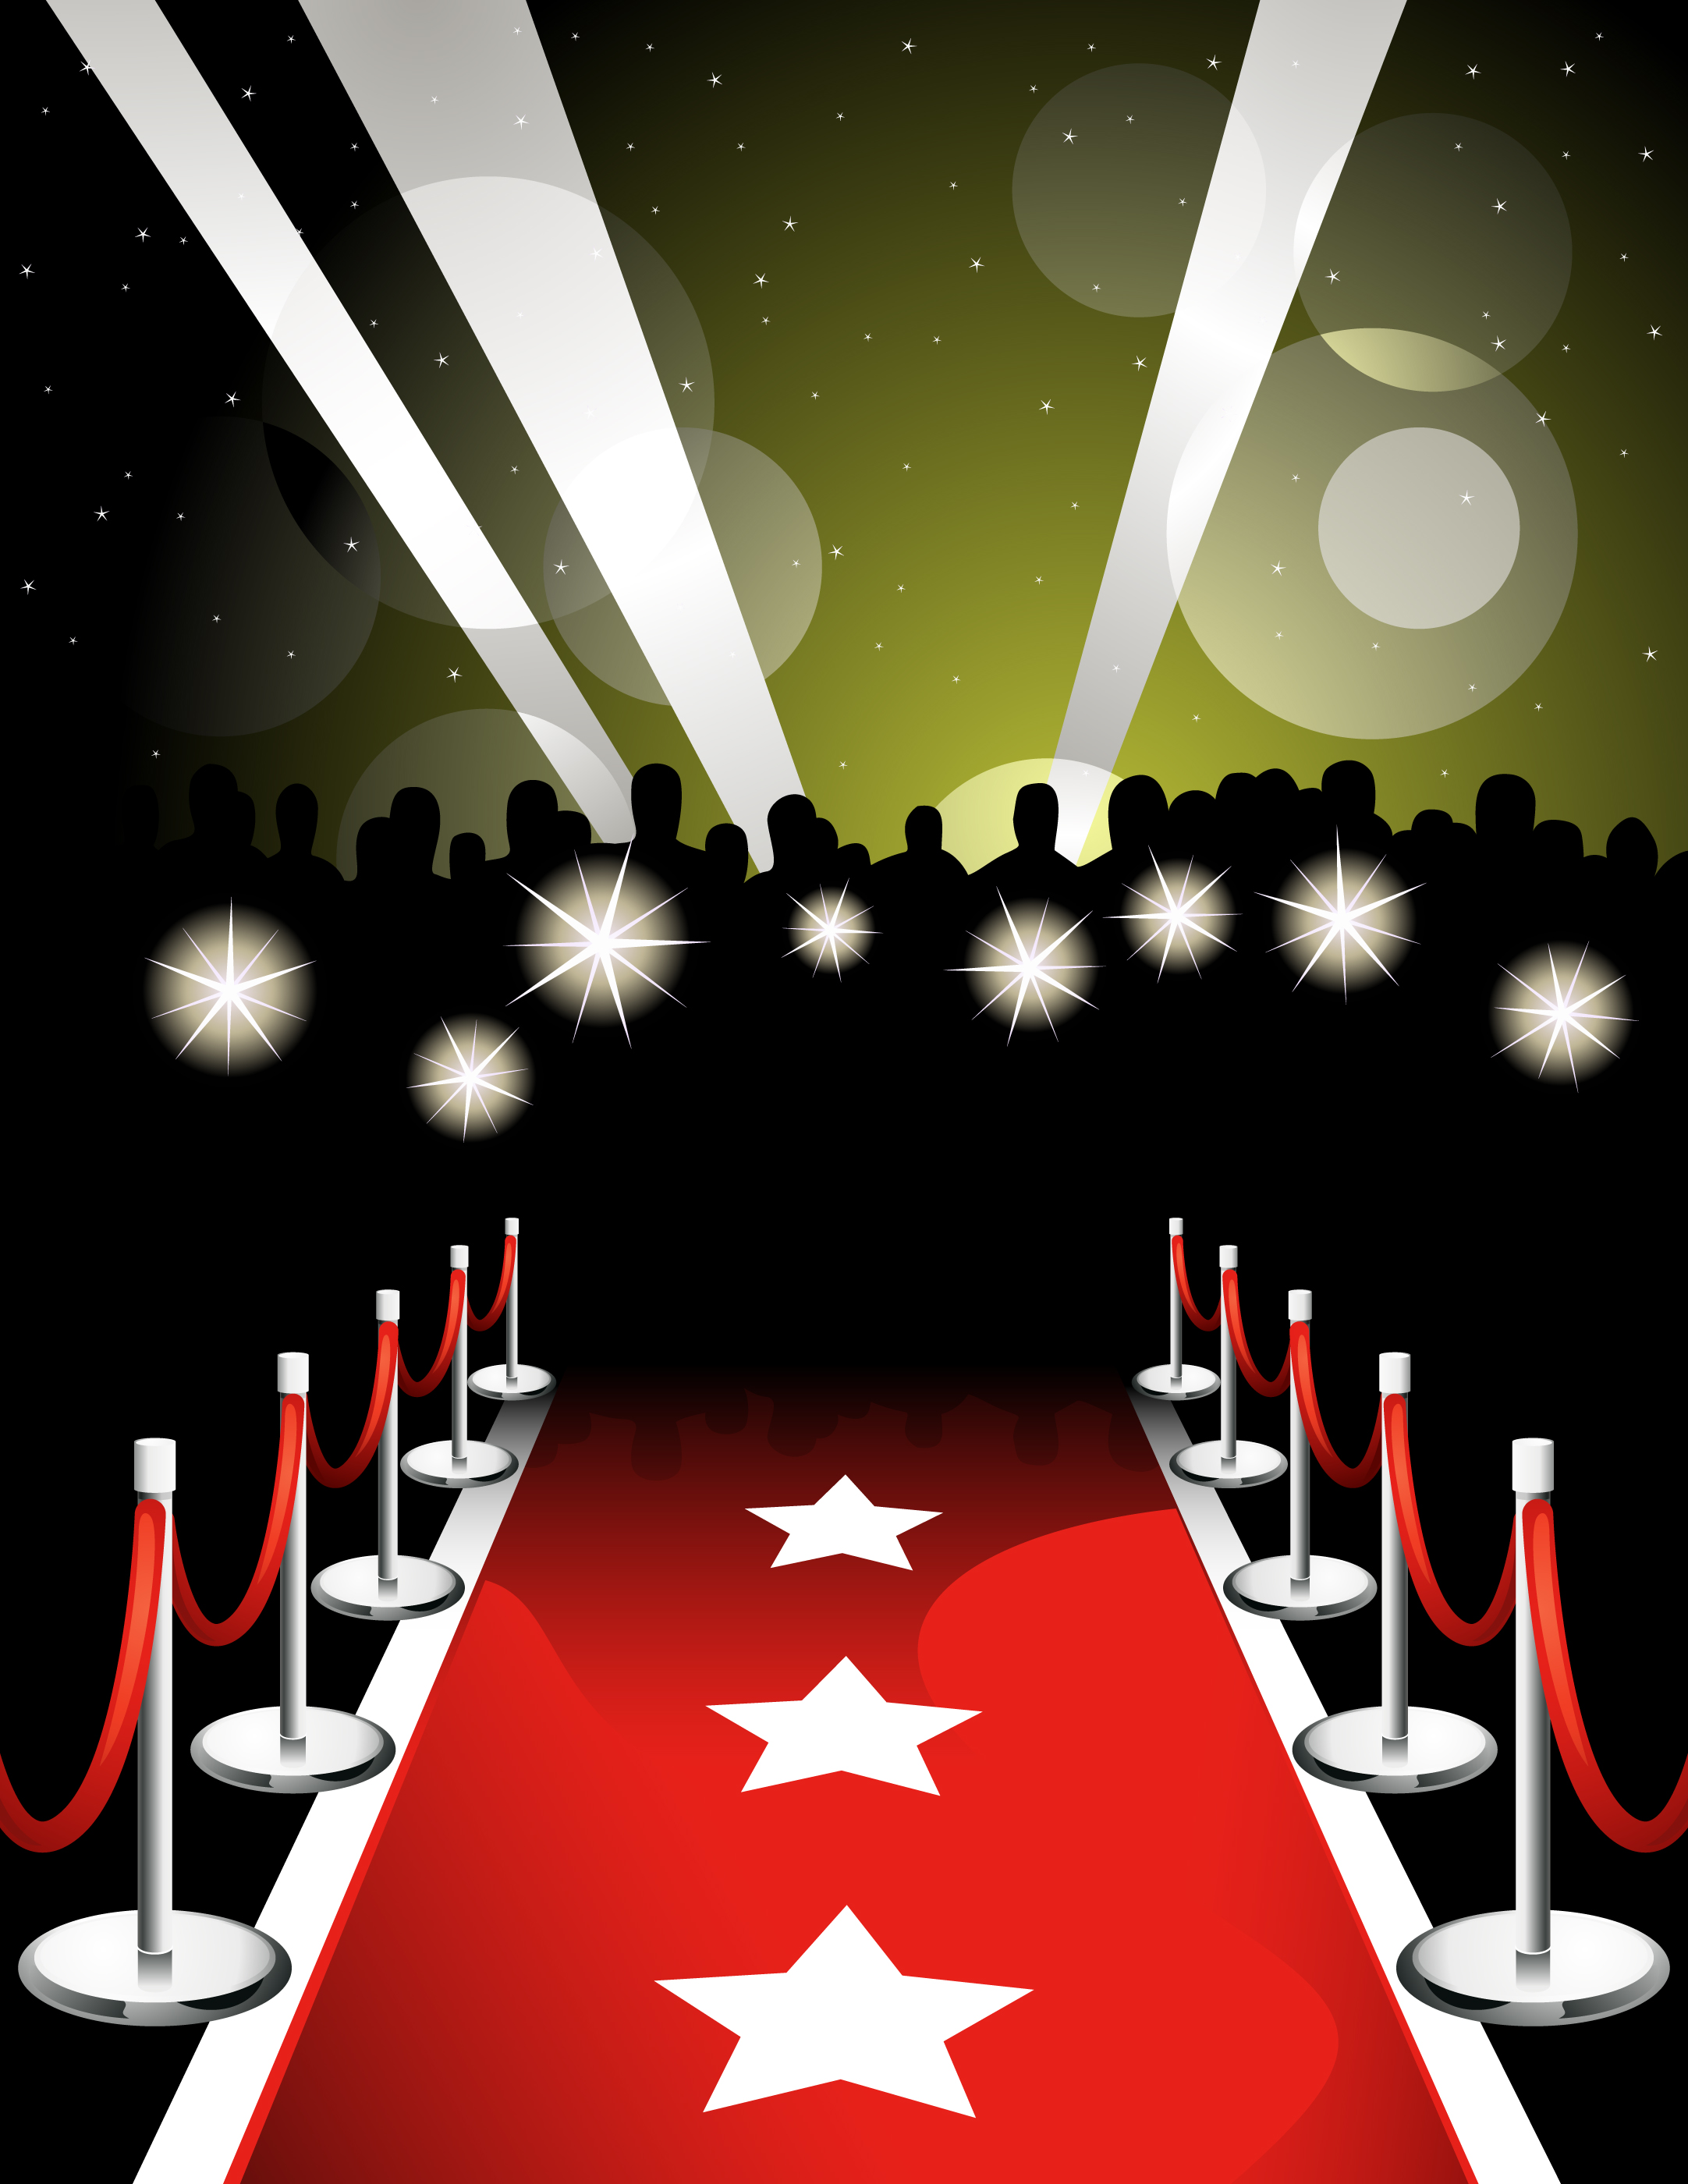 actor clipart theme